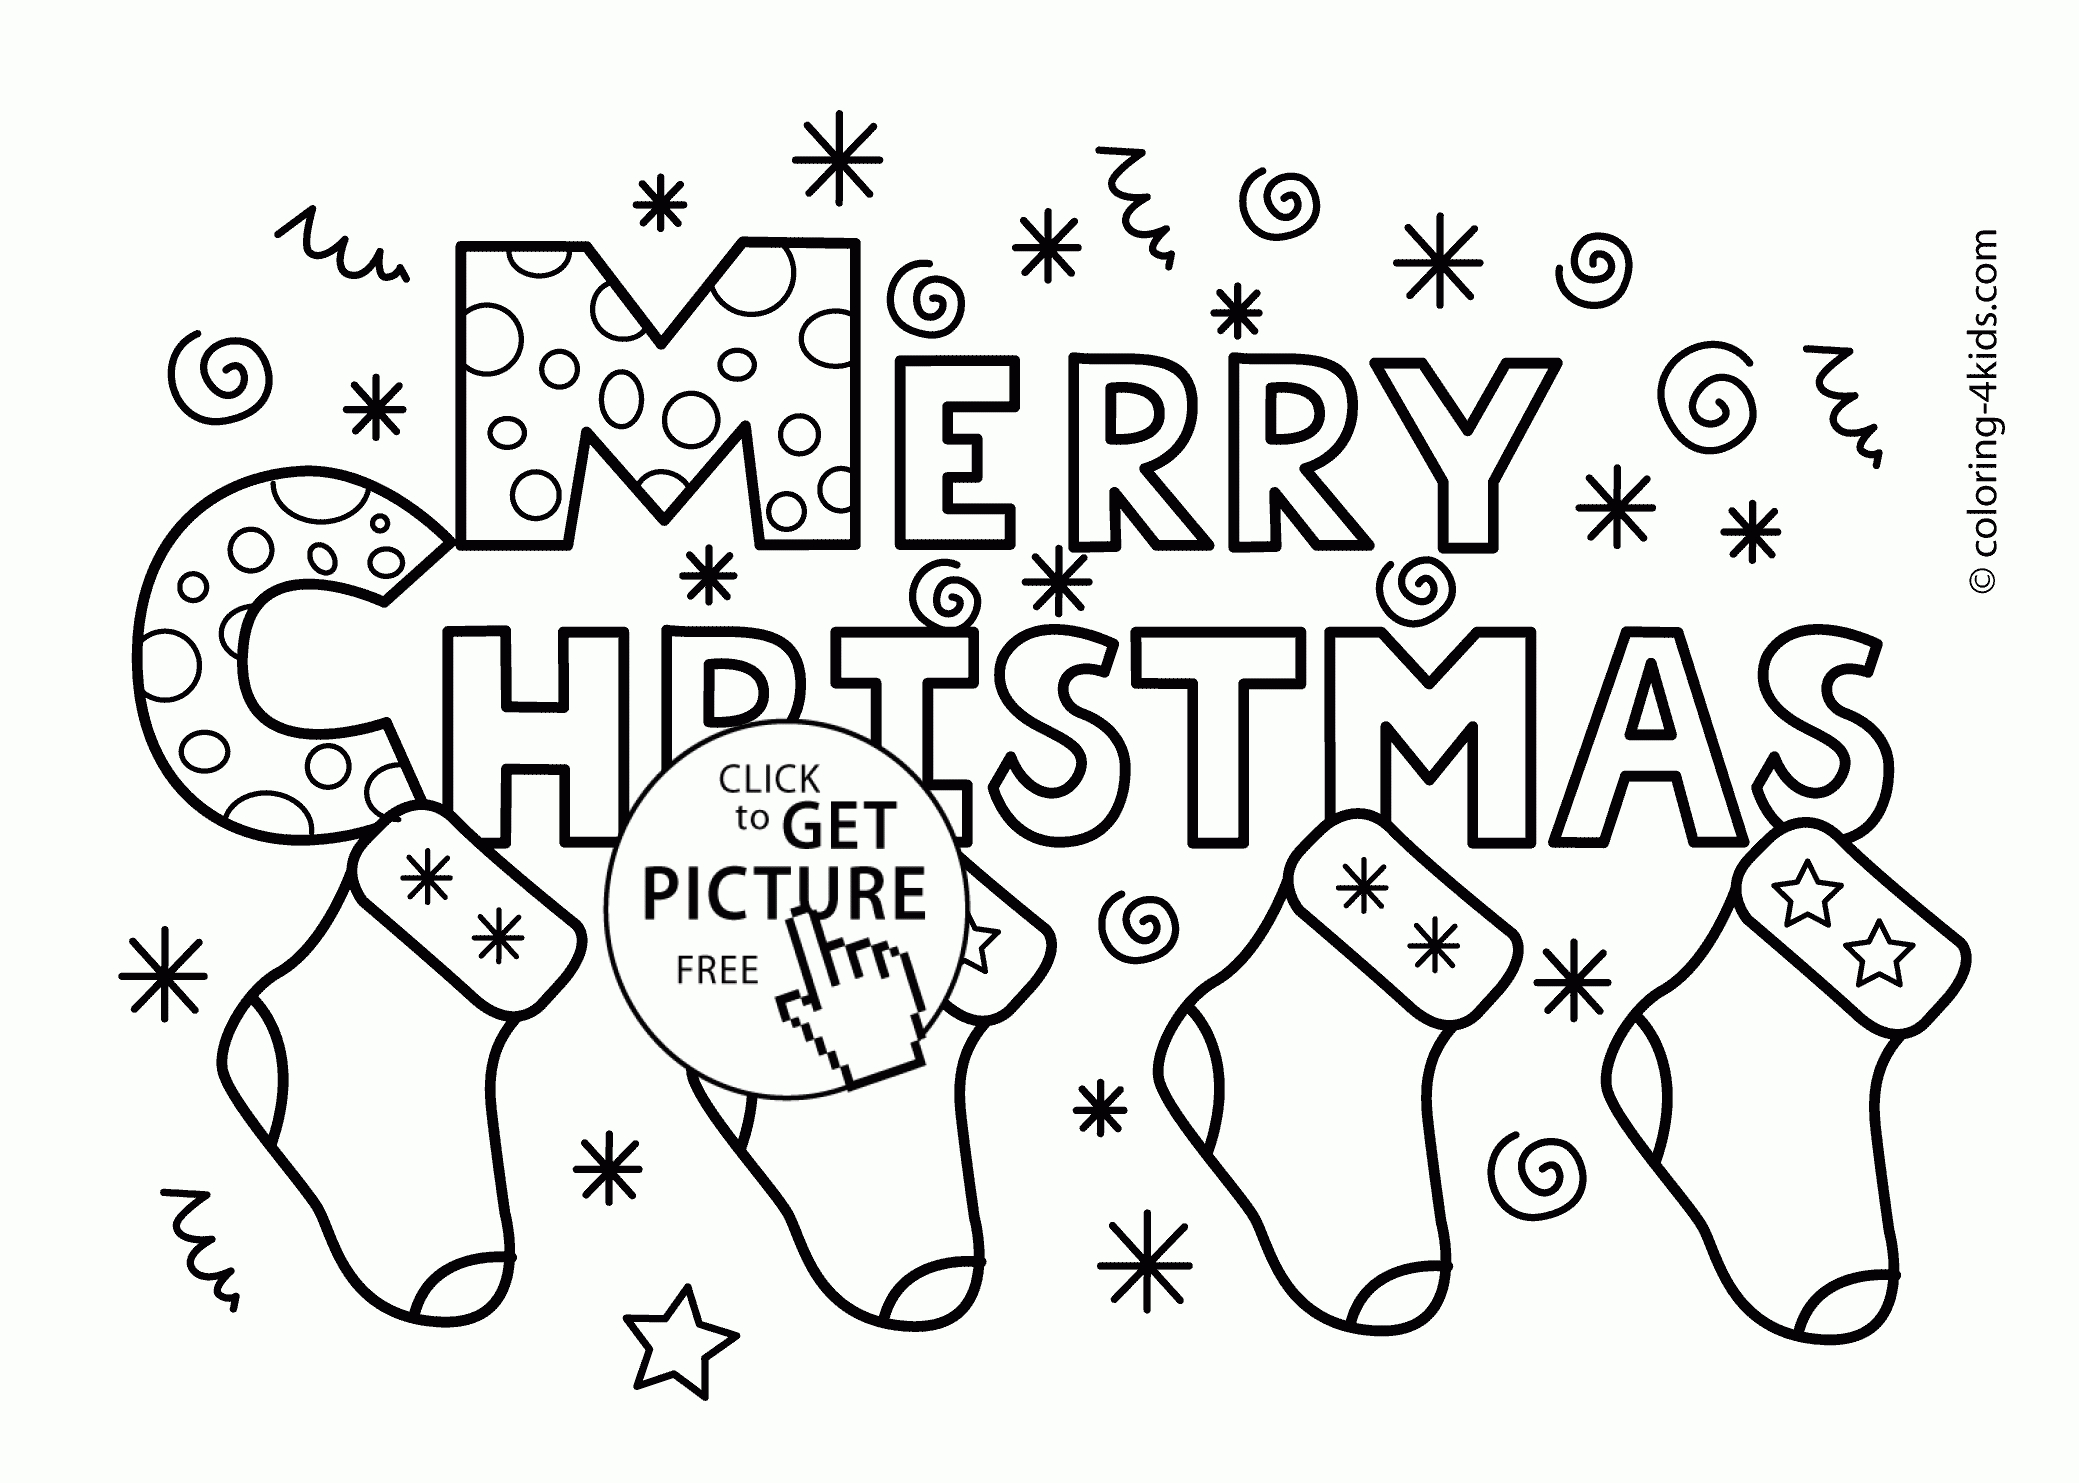 Merry Christmas Socks Coloring Pages For Kids, Printable Free - Free Christmas Printables For Kids